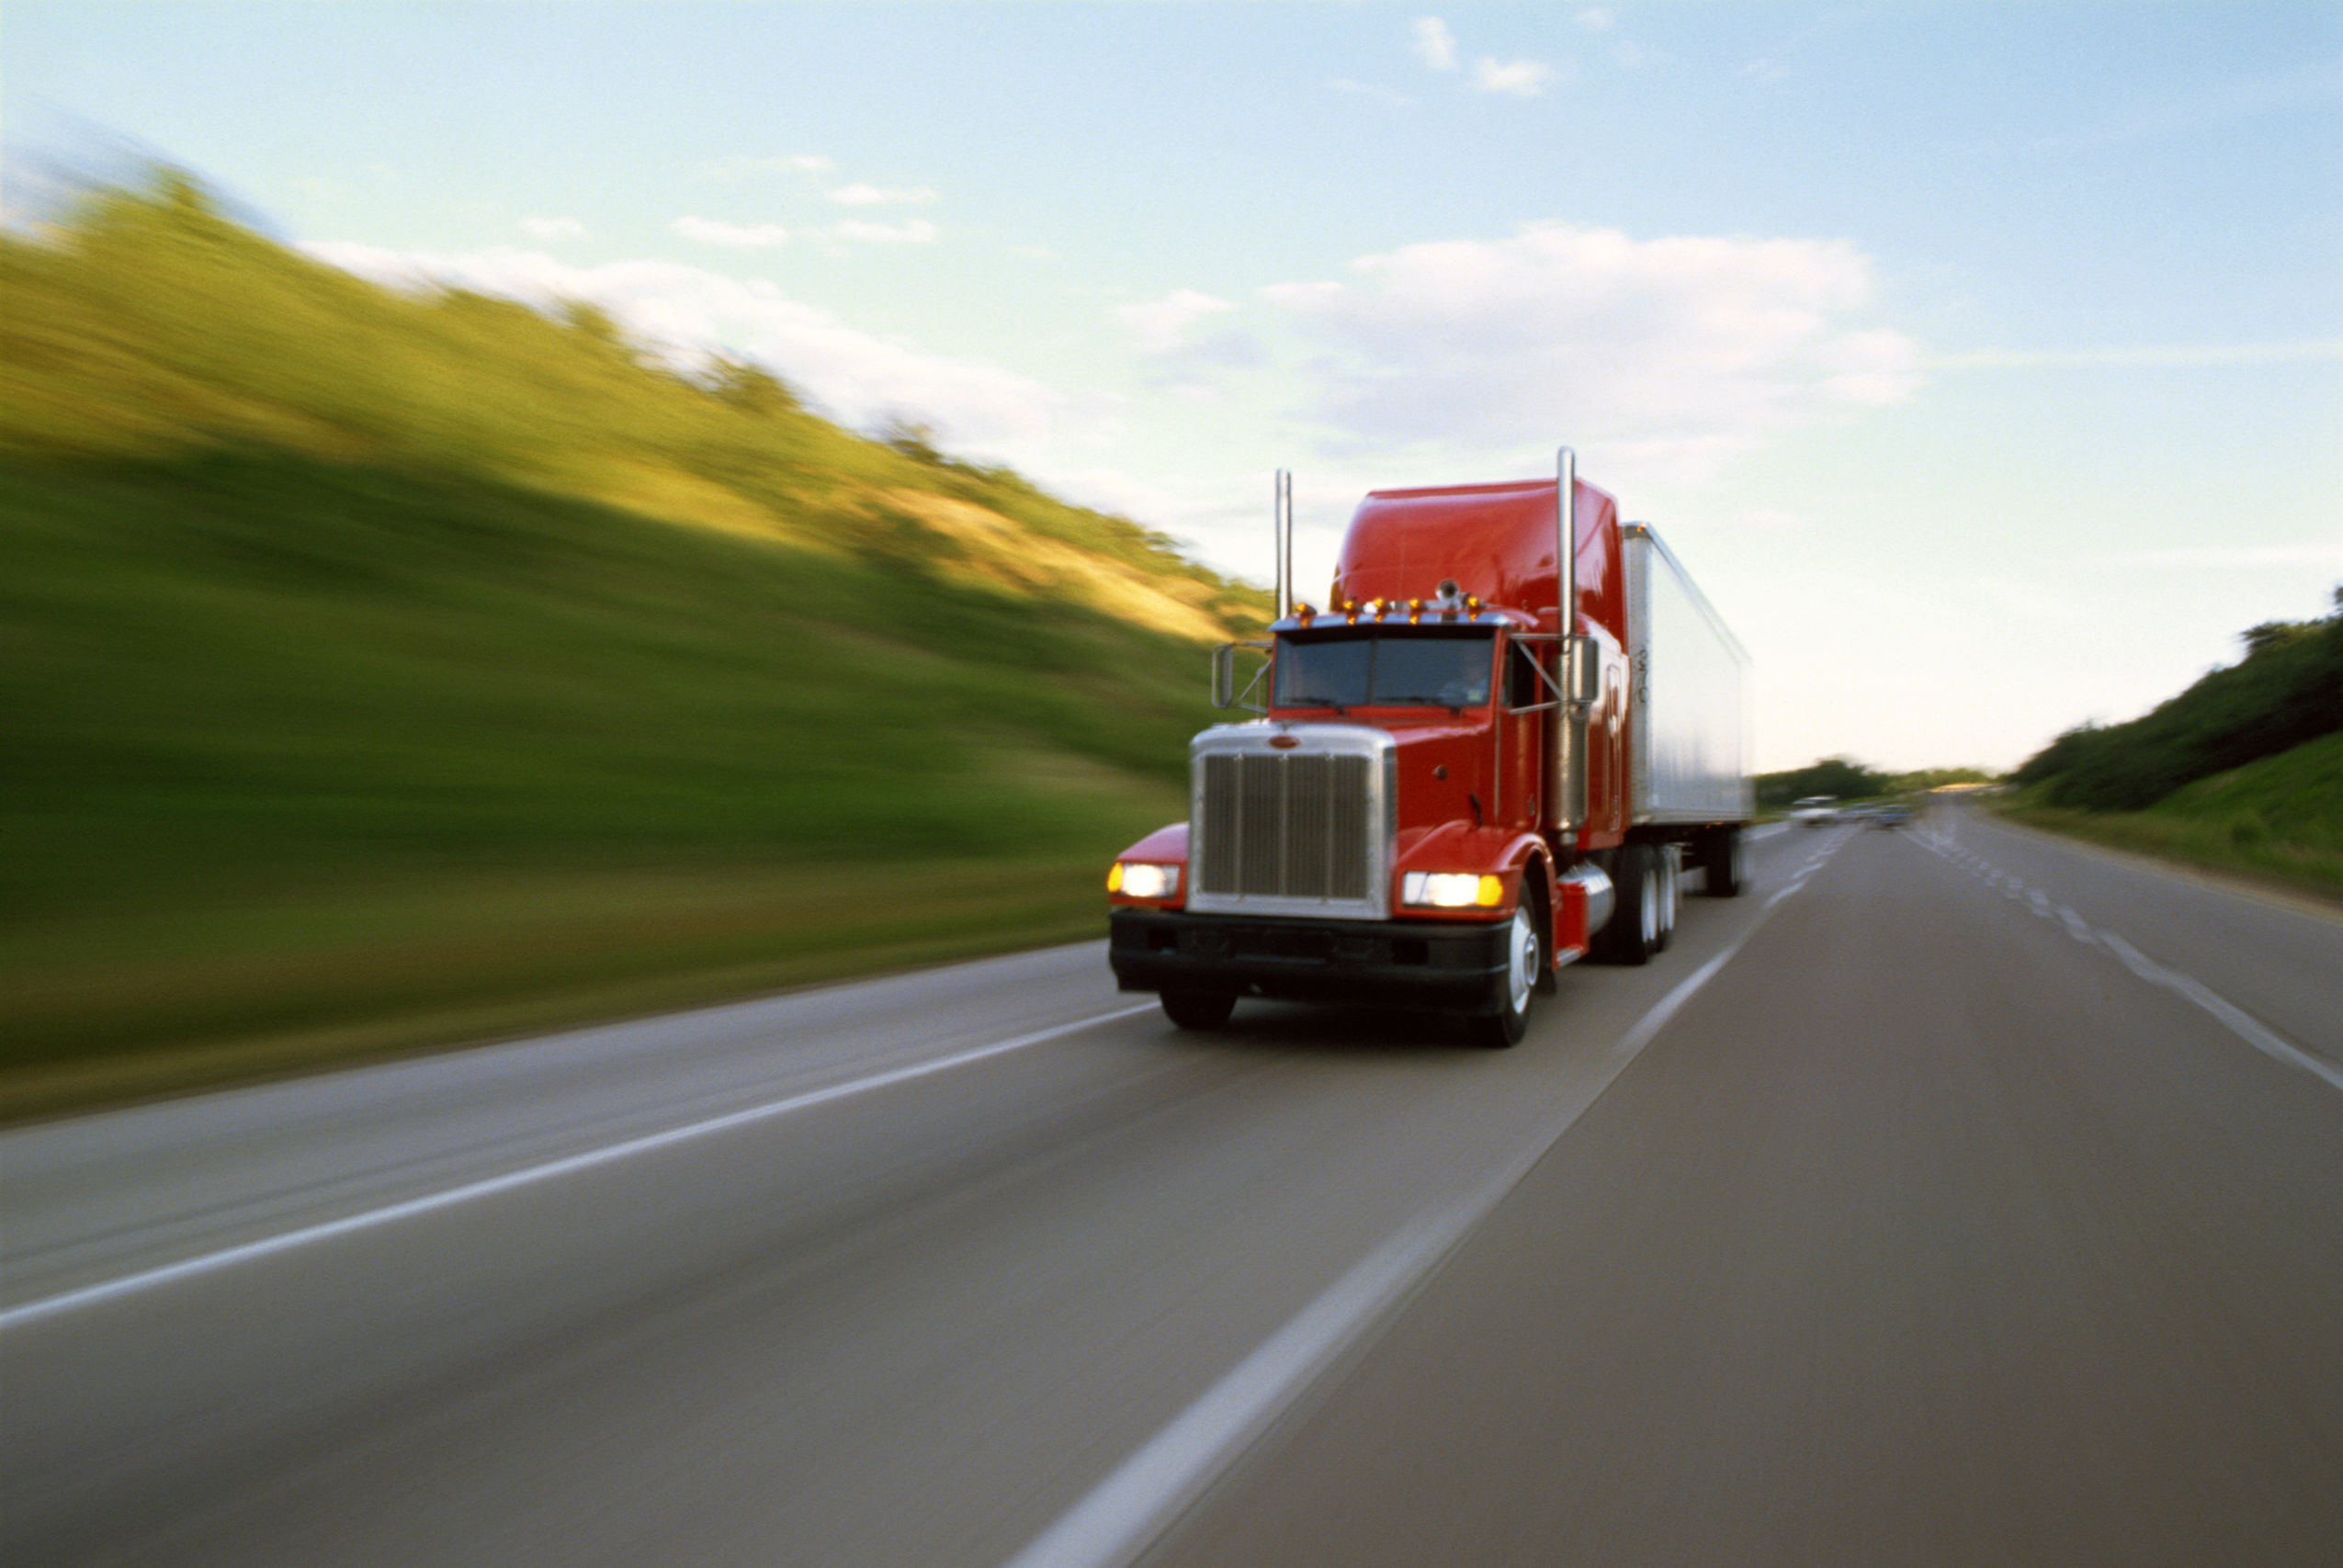 Transportation Freight Trends & News Roundup: Cargo Theft Trends, Teamsters Sue DOT and More